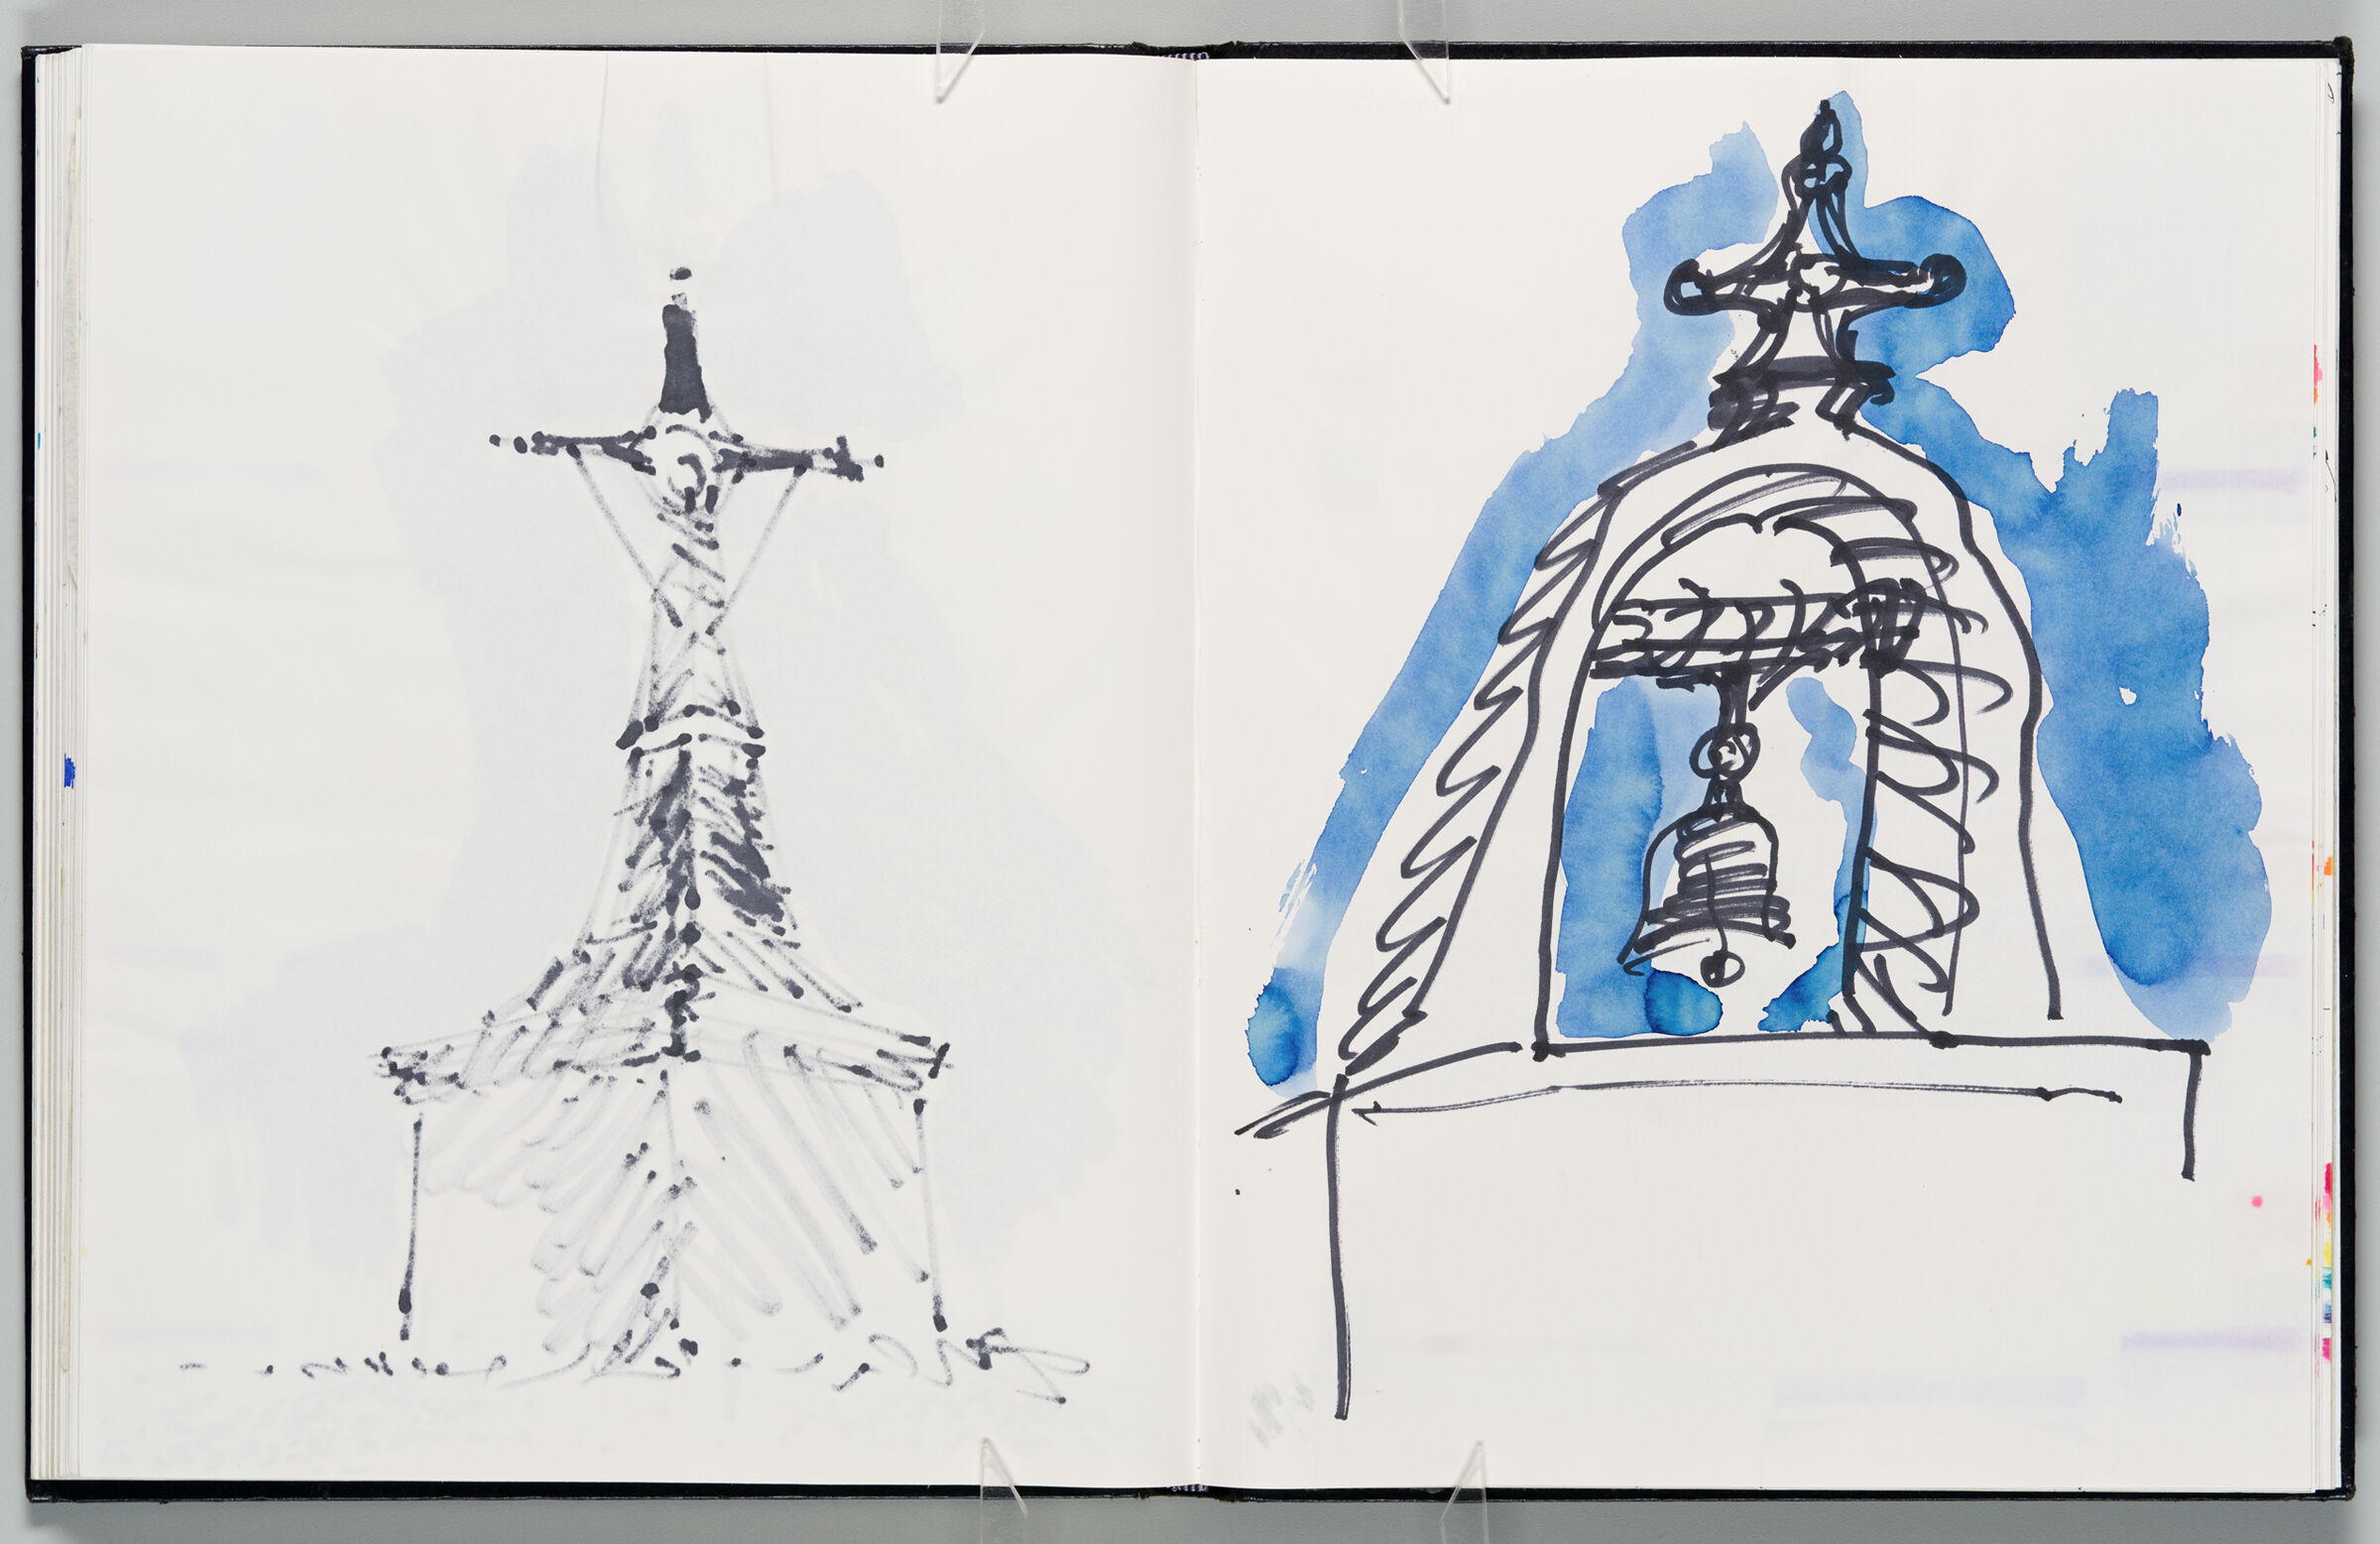 Untitled (Bleed-Through Of Previous Page, Left Page); Untitled (St. Véran, Right Page)